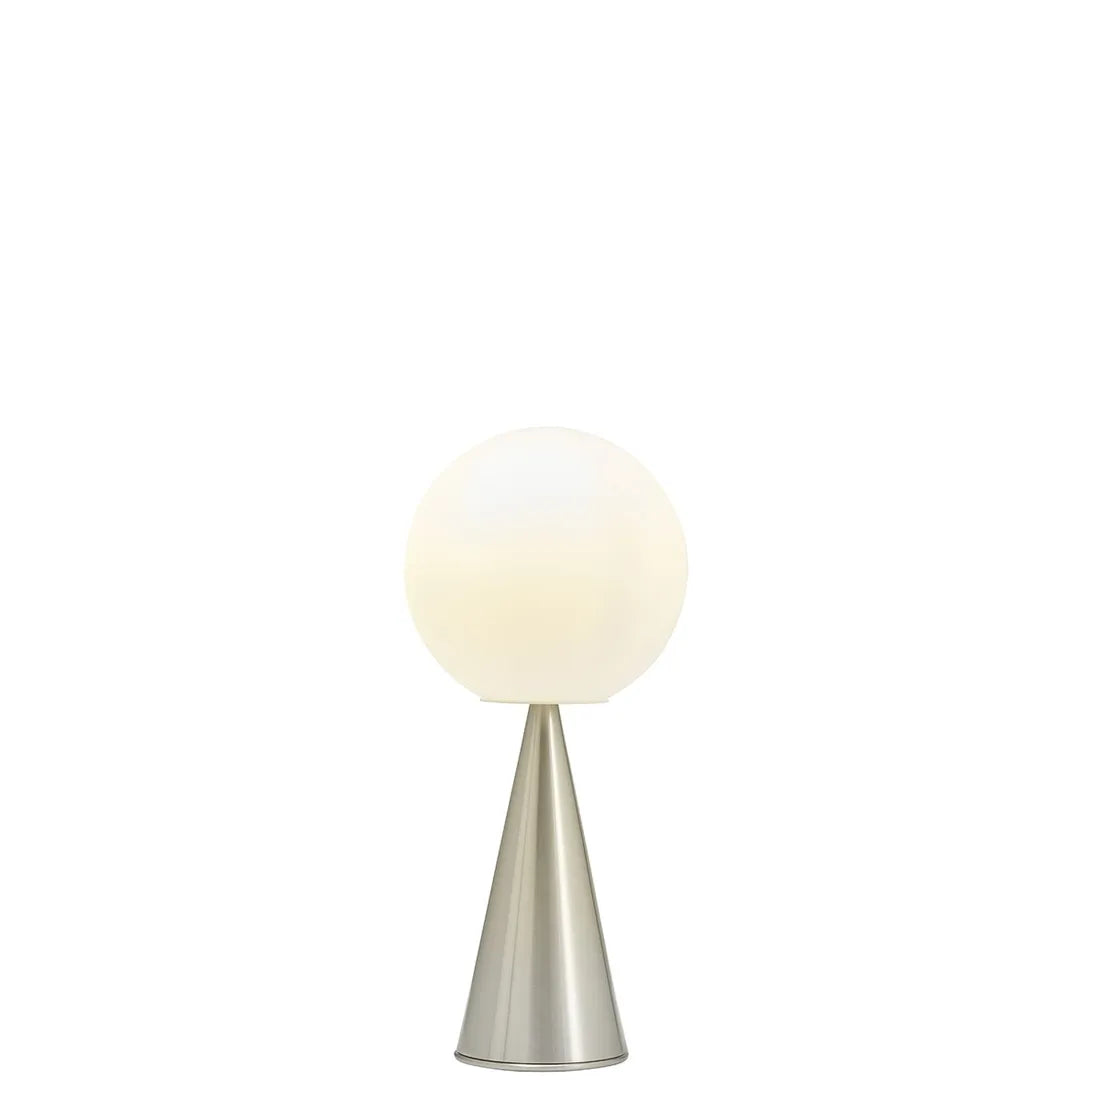 best table light india glass metal, big table lamps, tall table lamps in India - nickel